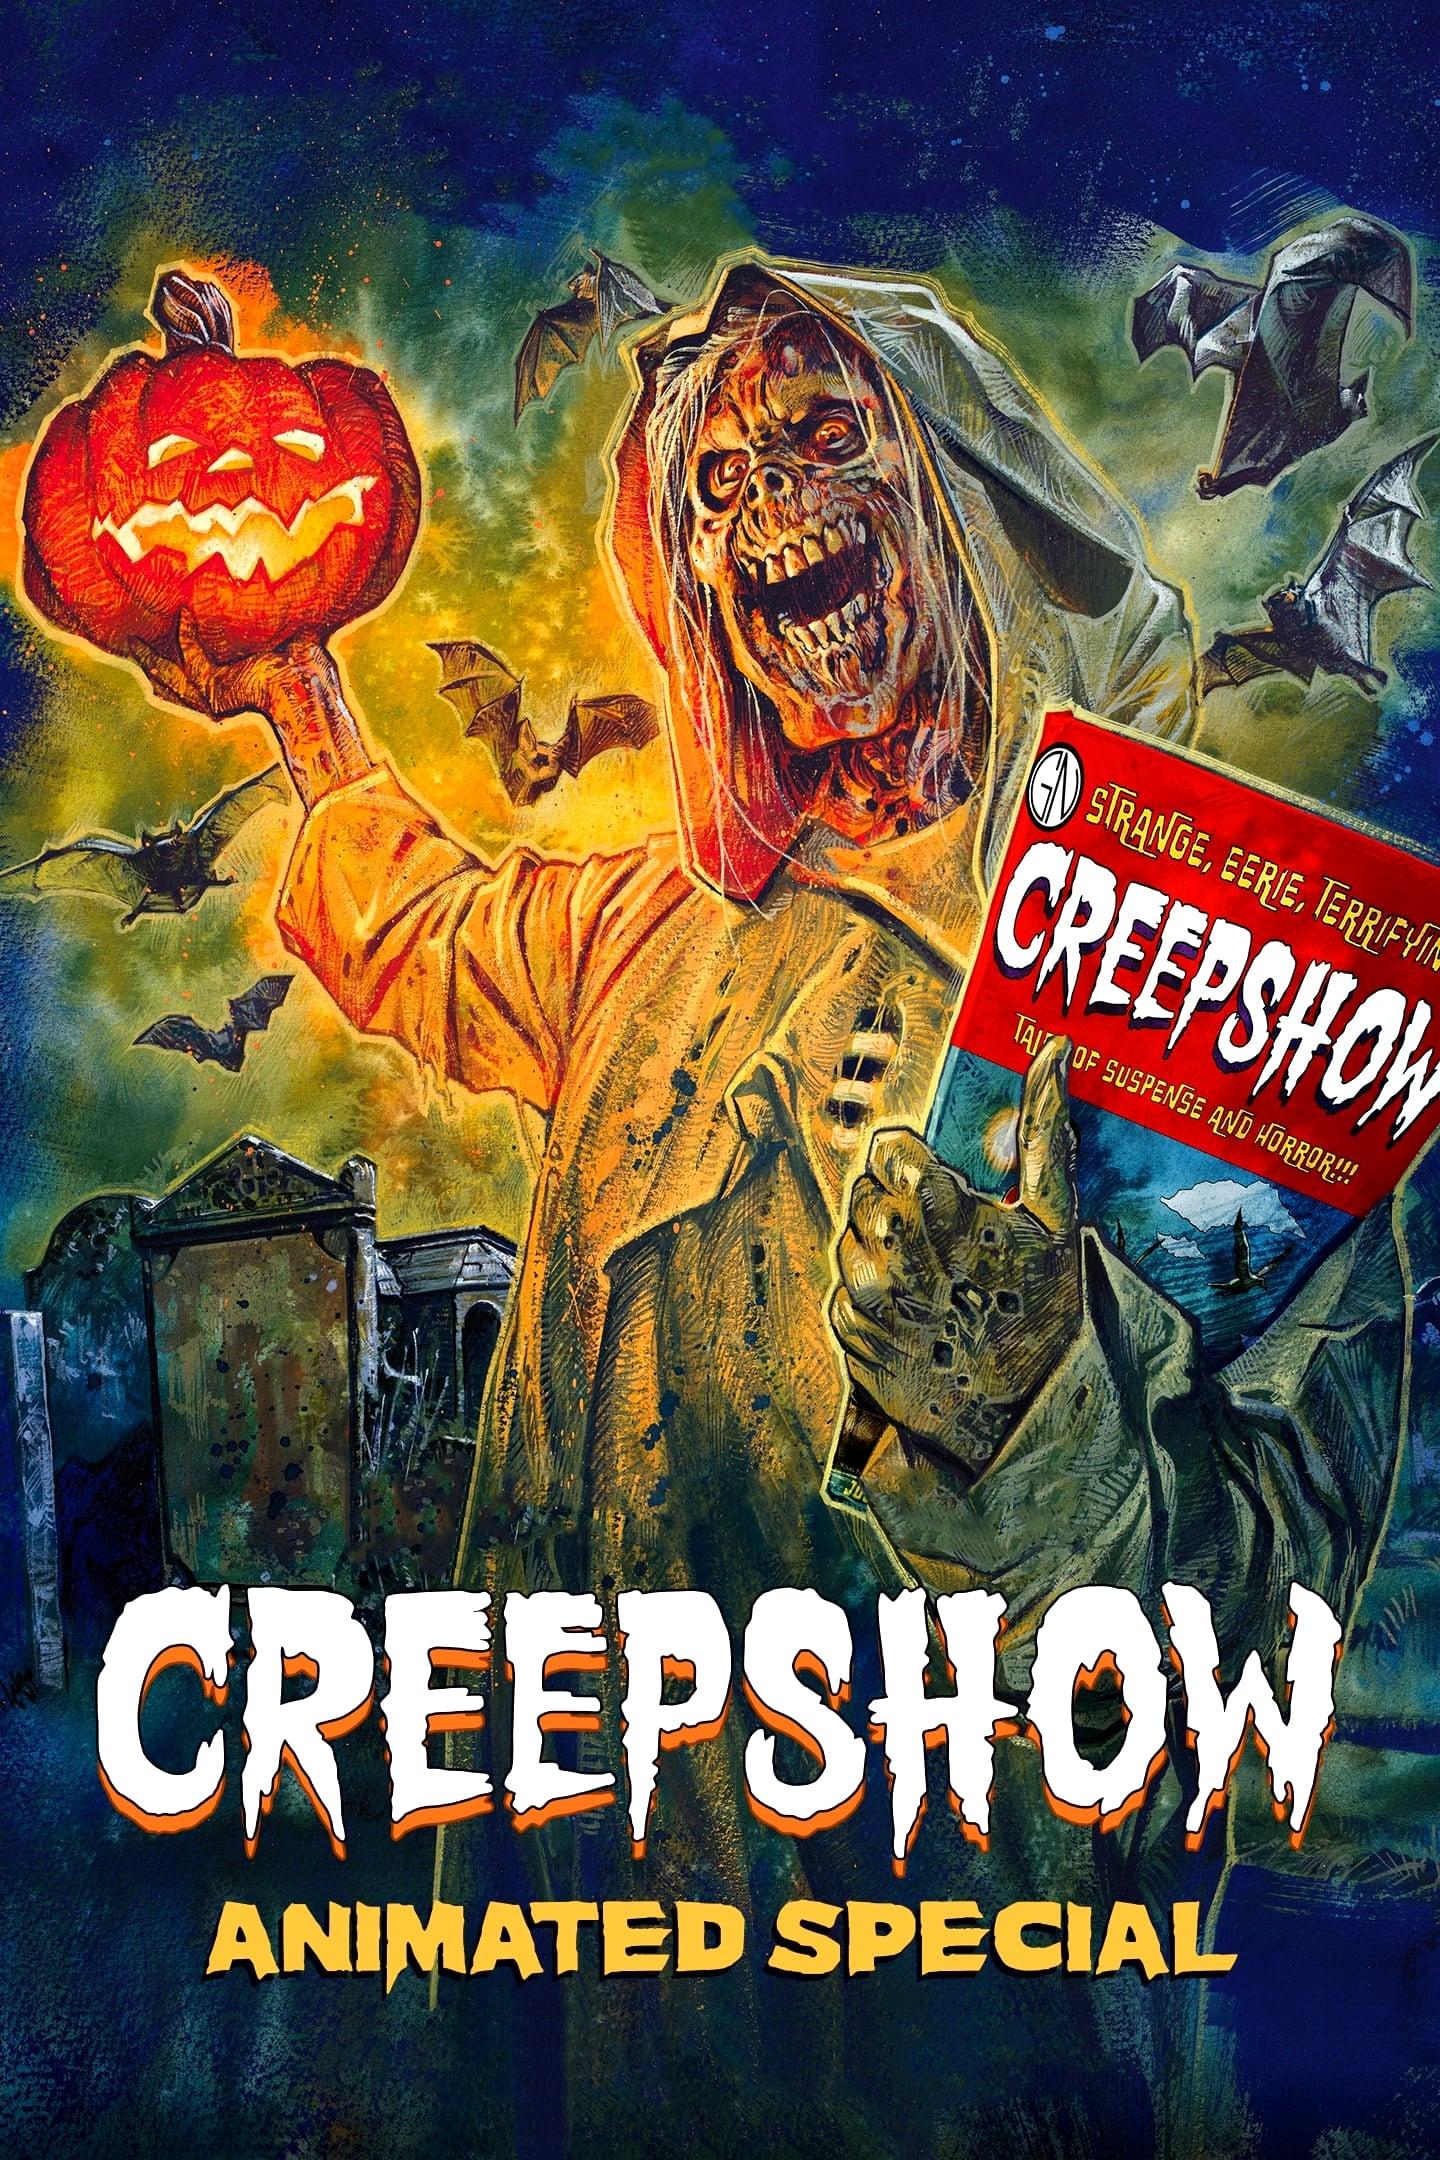 A Creepshow Animated Special poster